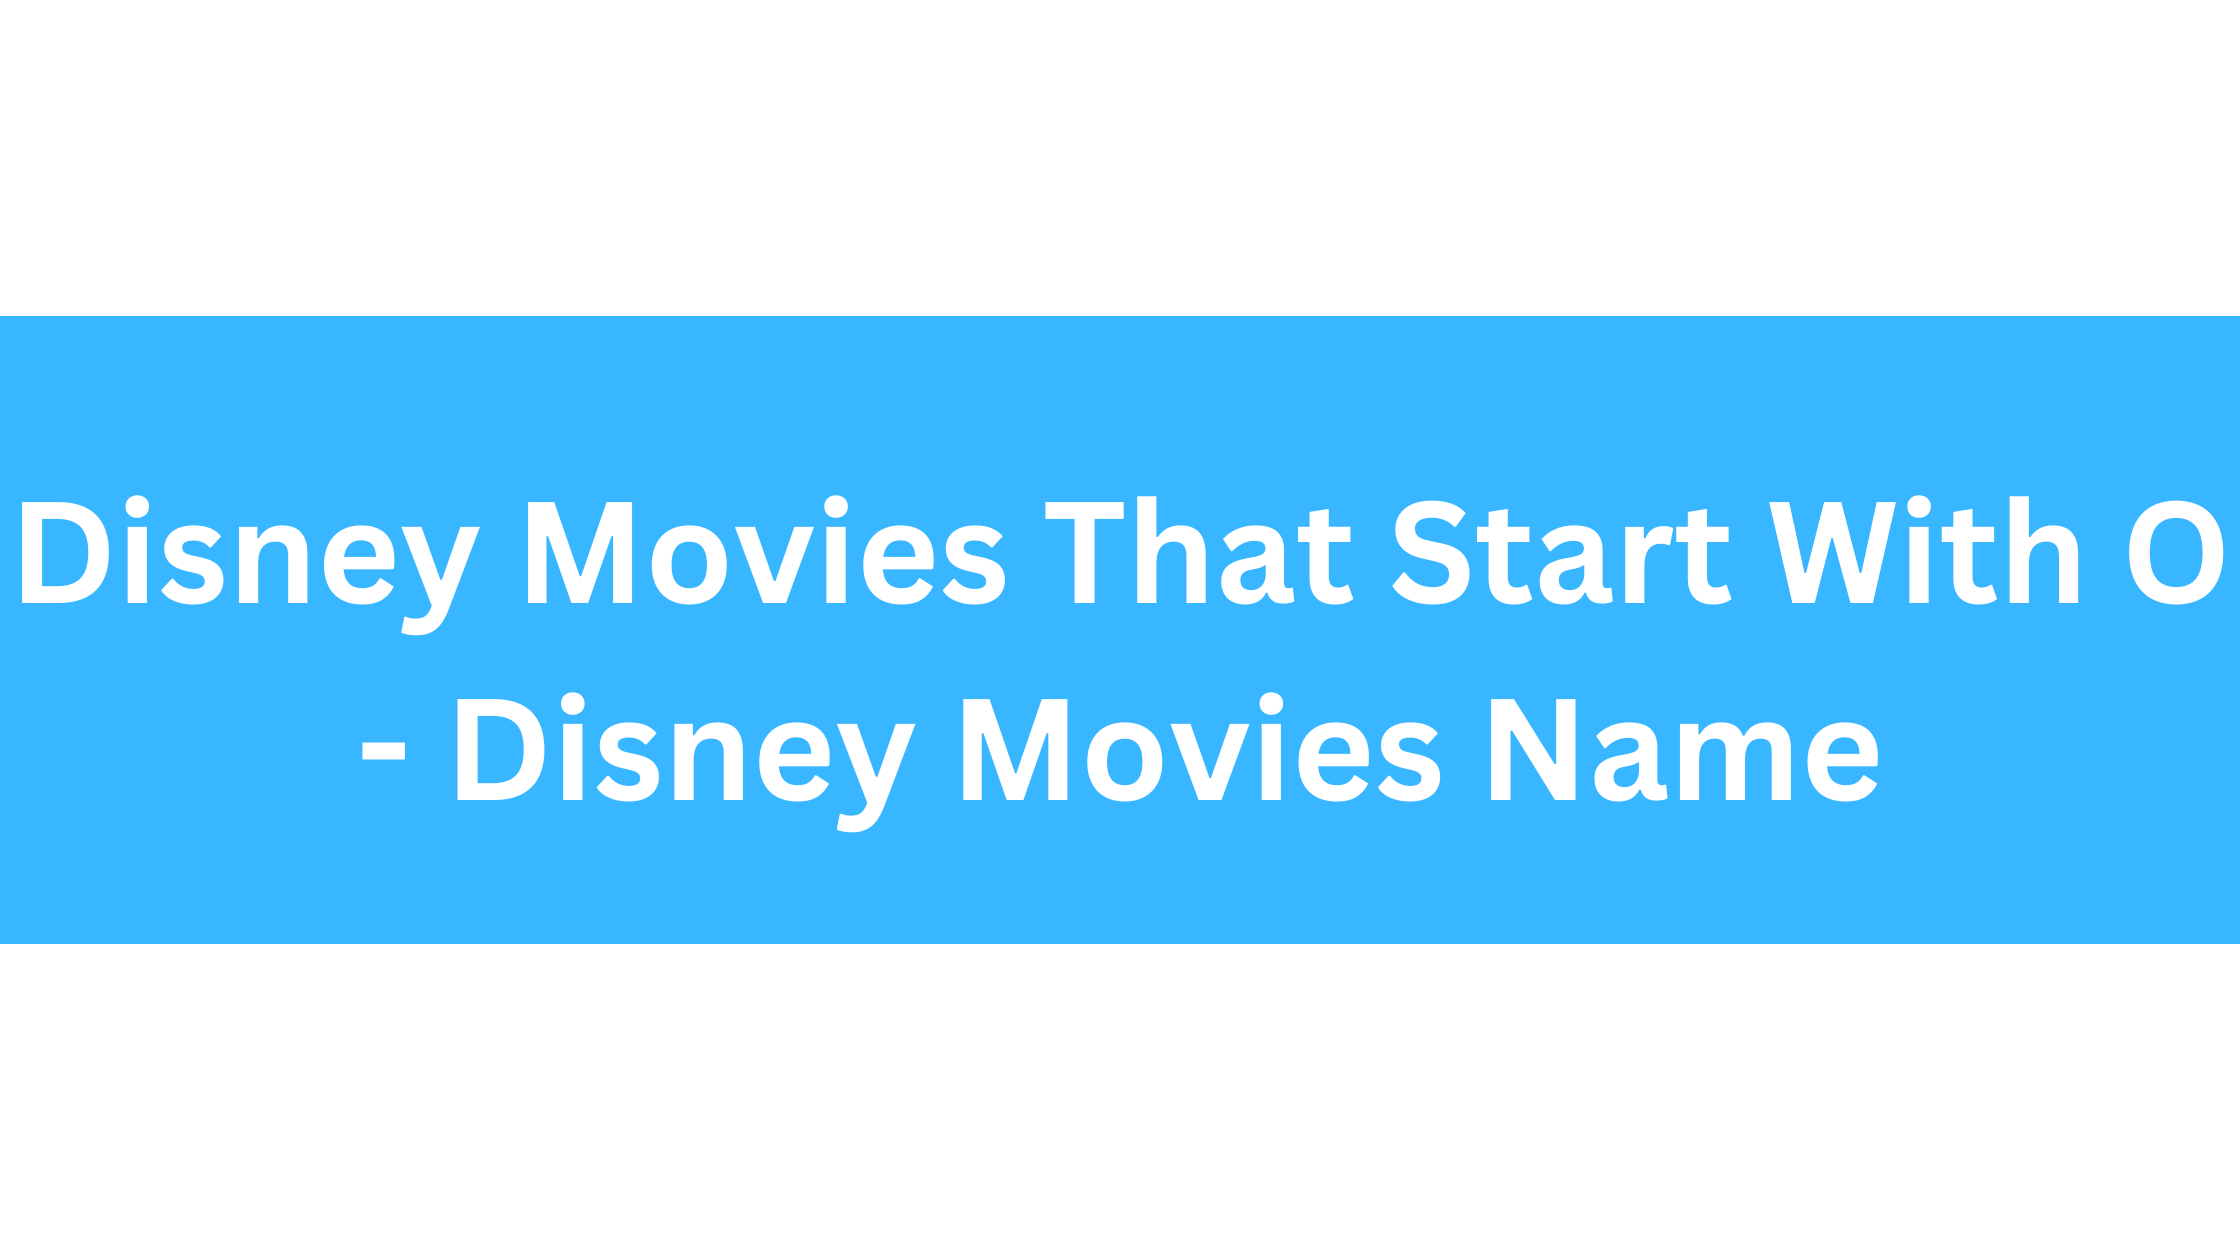 Disney Movies That Start With O